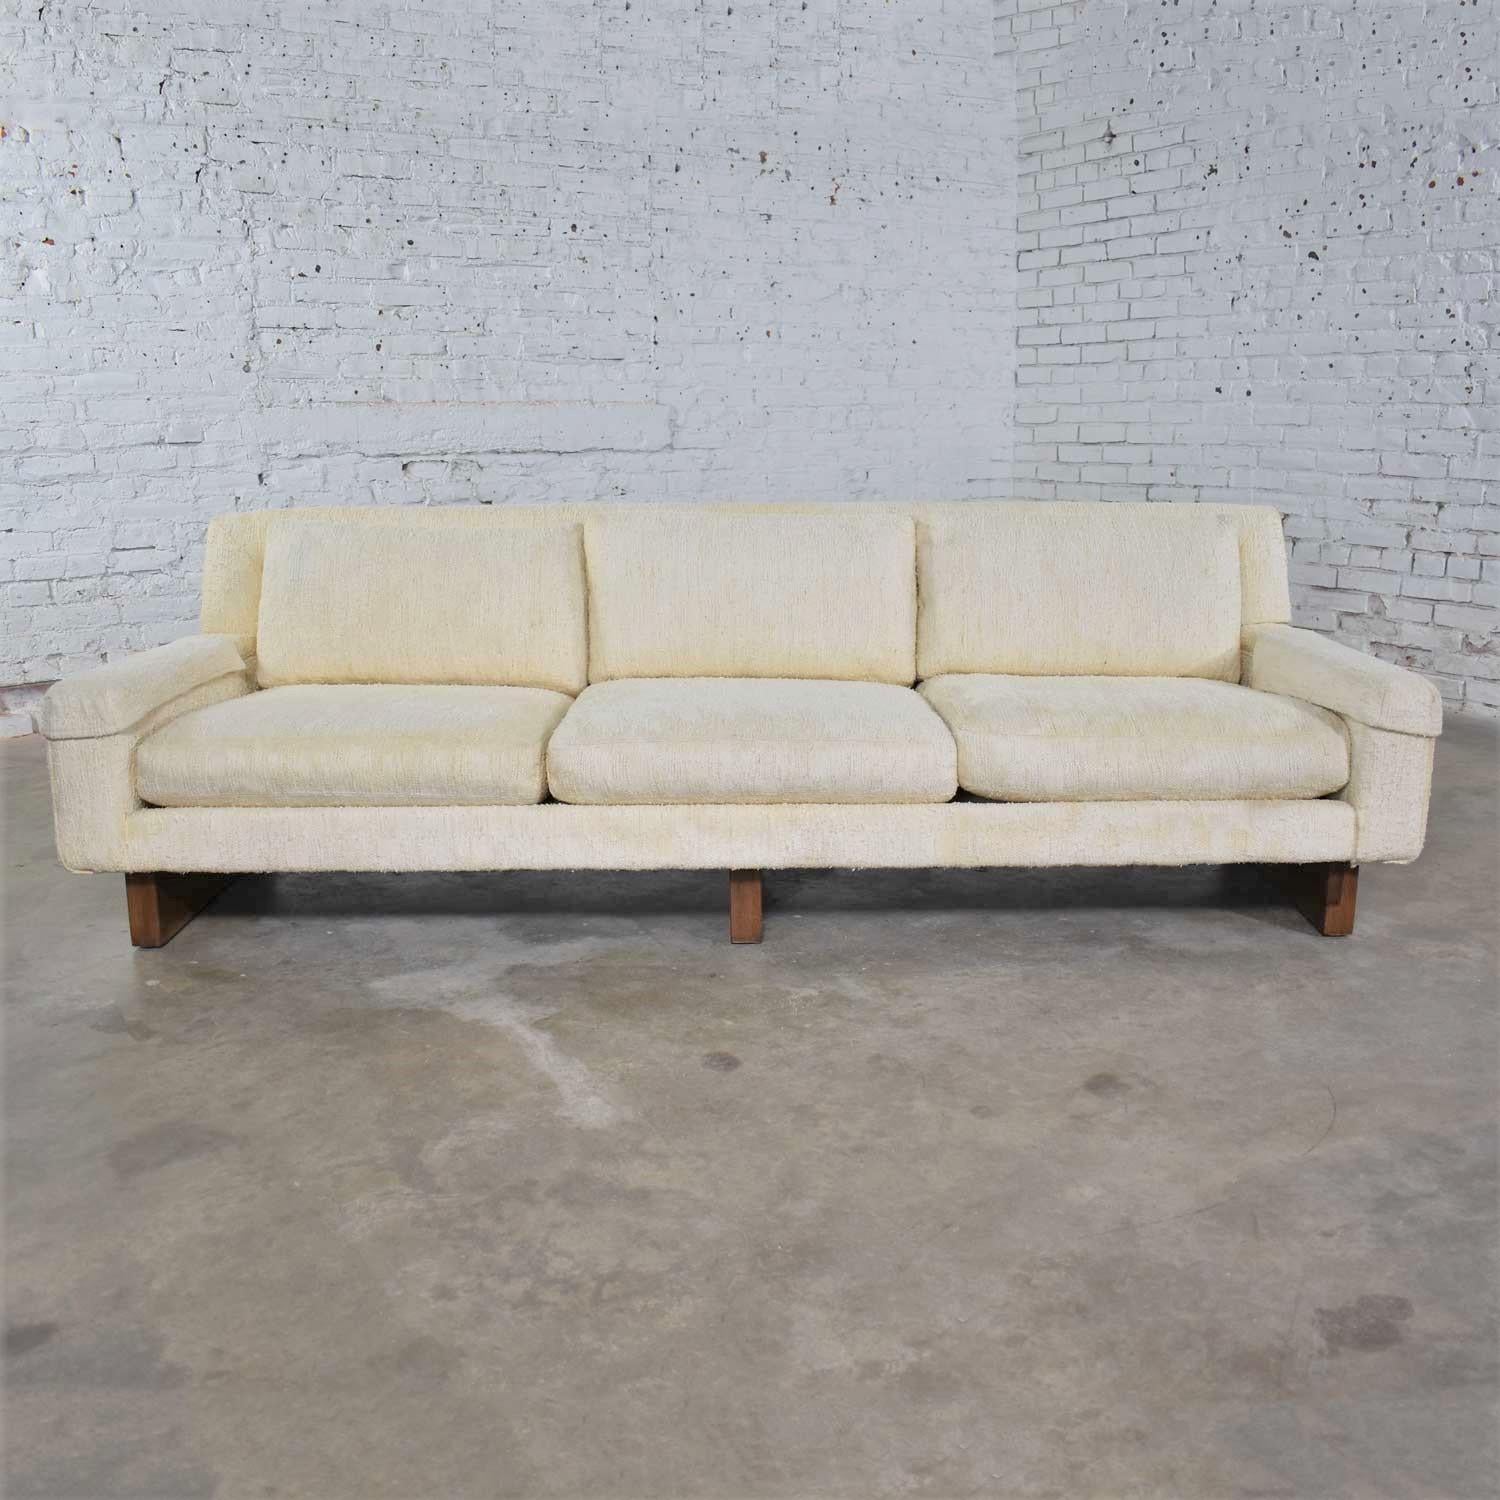 Mid-Century Modern Lawson Style White Sofa by Flair Division for Bernhardt 1